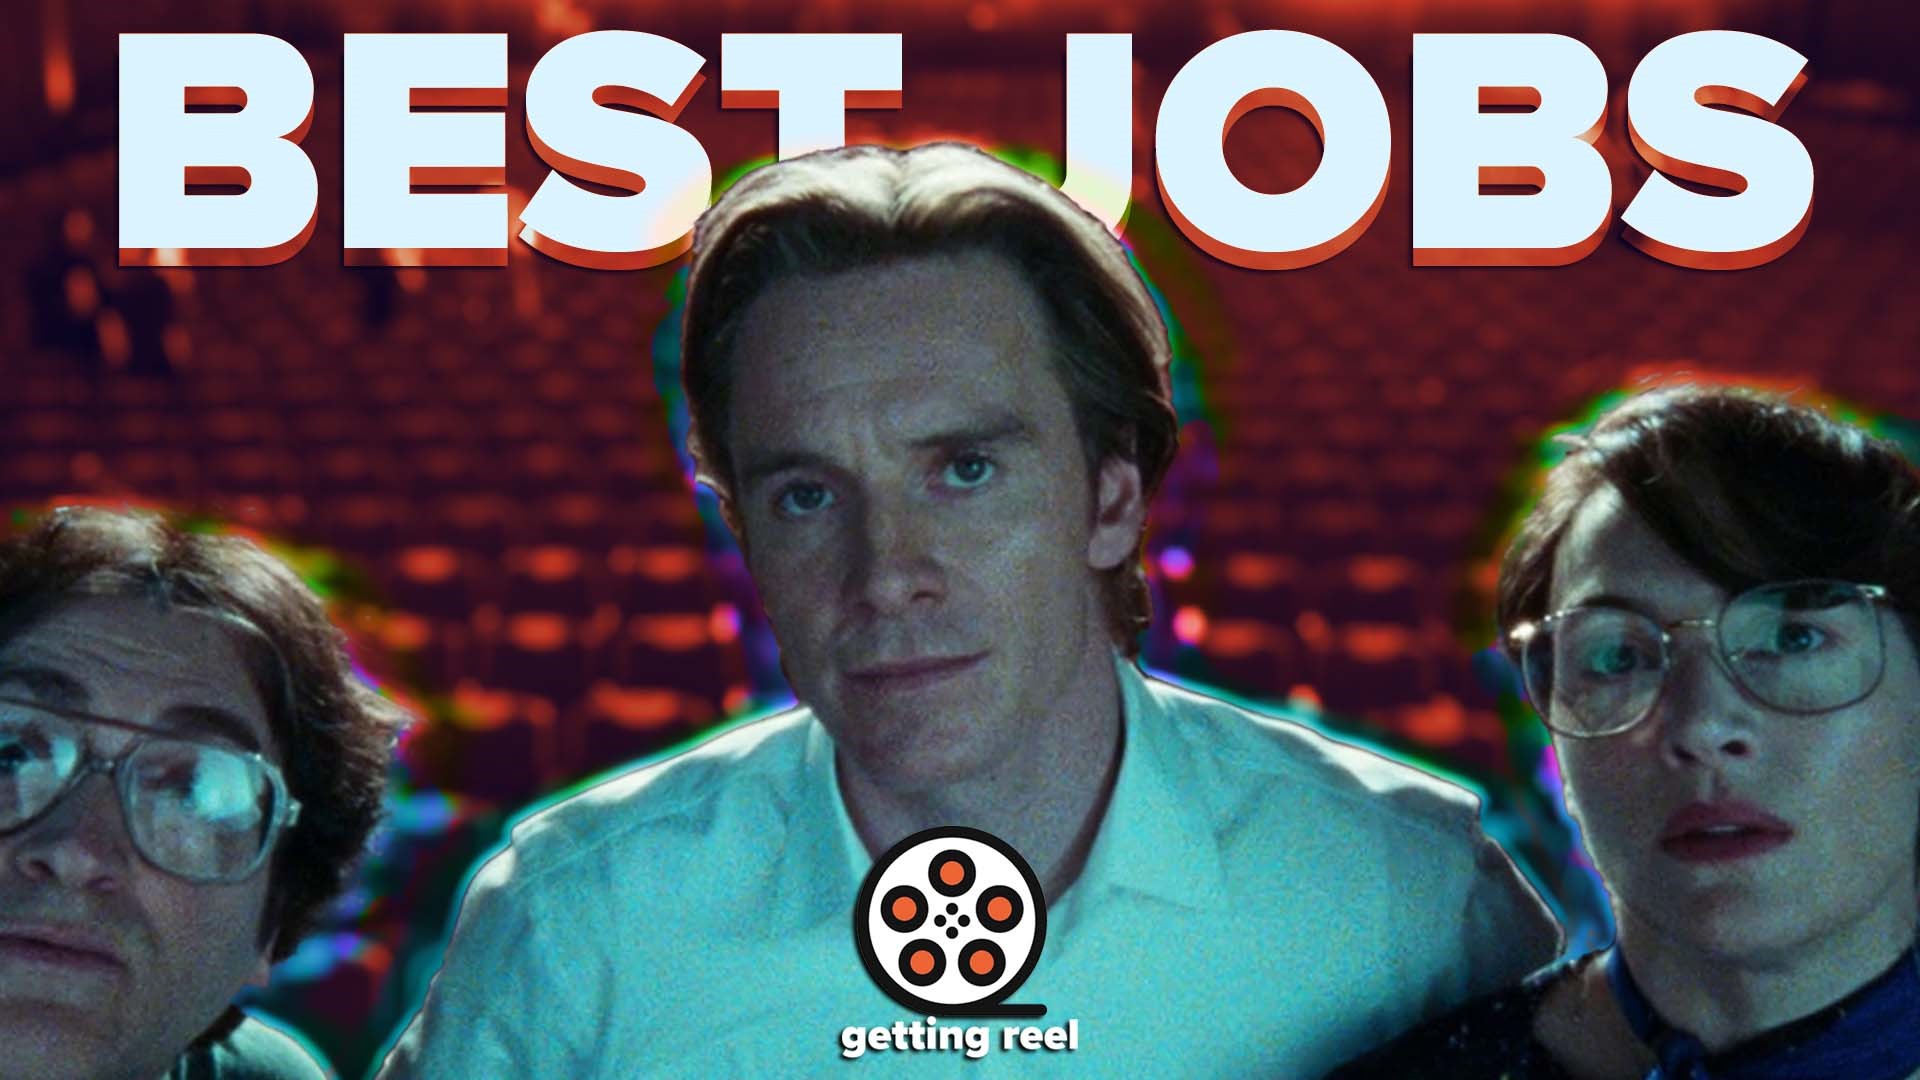 From Steve Jobs to steaming about jobs, JD is back on The Vine to talk about the best movies about jobs!